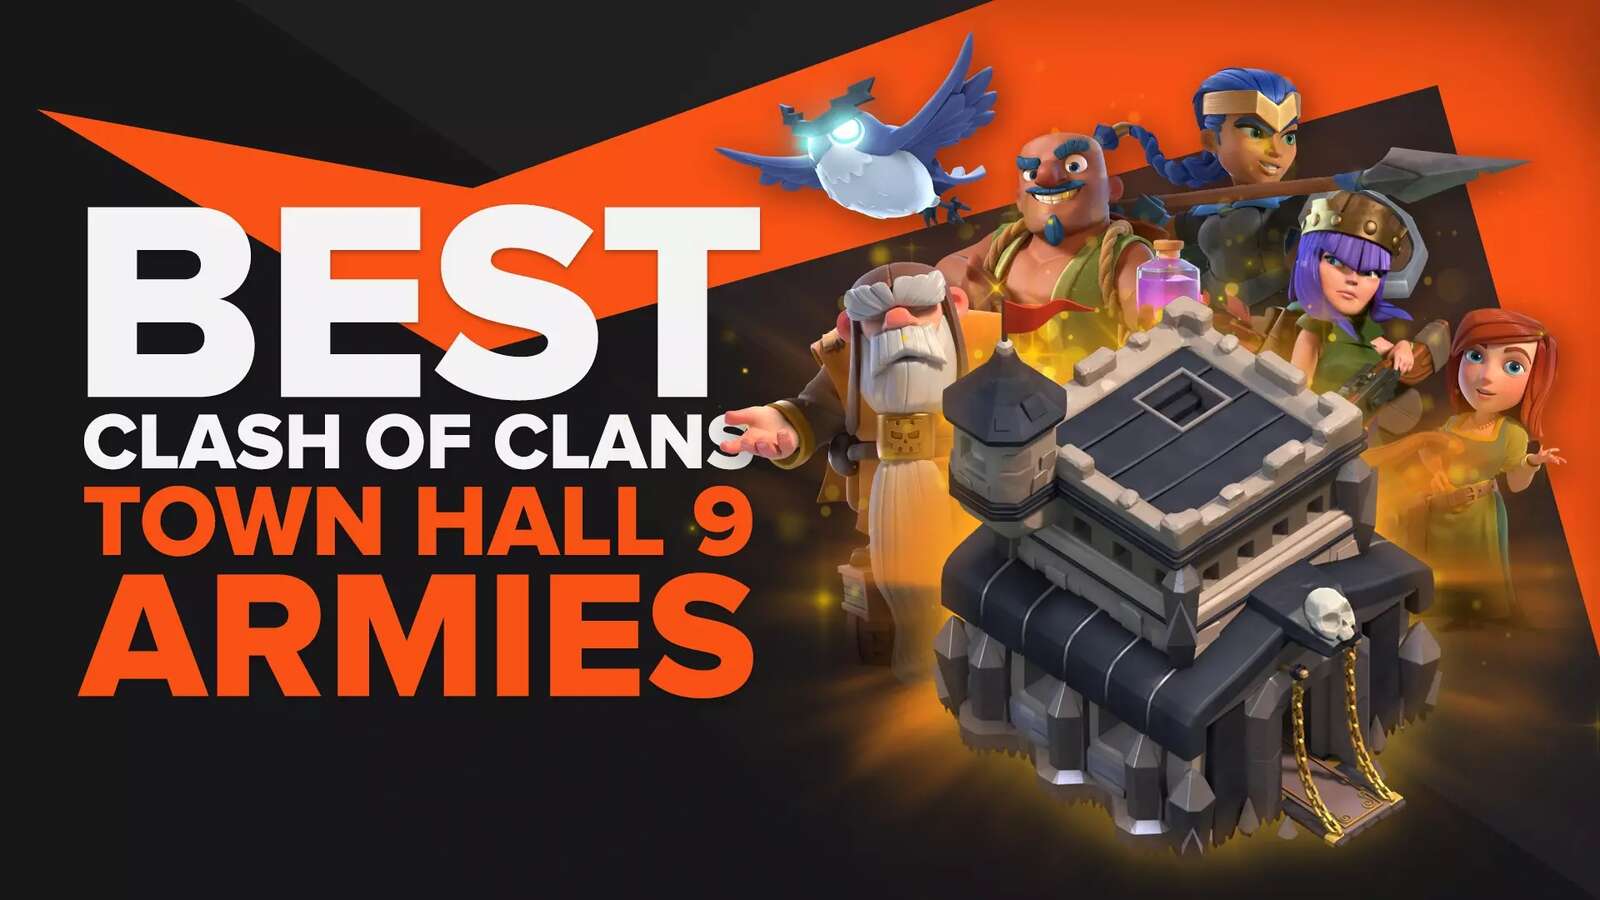 What Is The Best Army In Clash of Clans For Town Hall 9